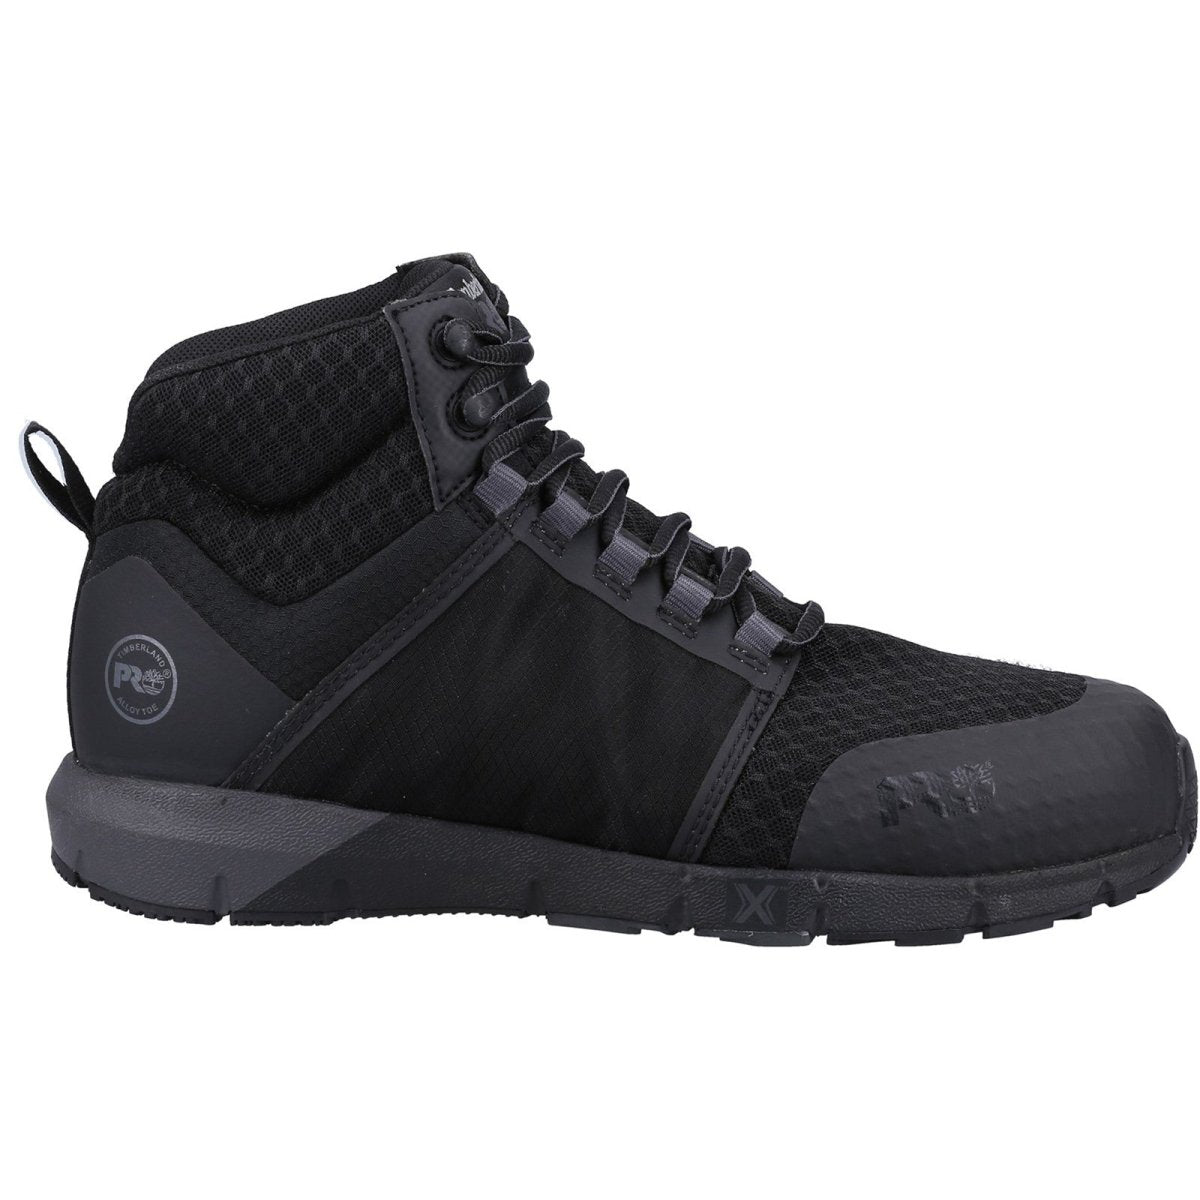 Timberland Pro Radius Mid Composite Toe Safety Work Boots - Shoe Store Direct